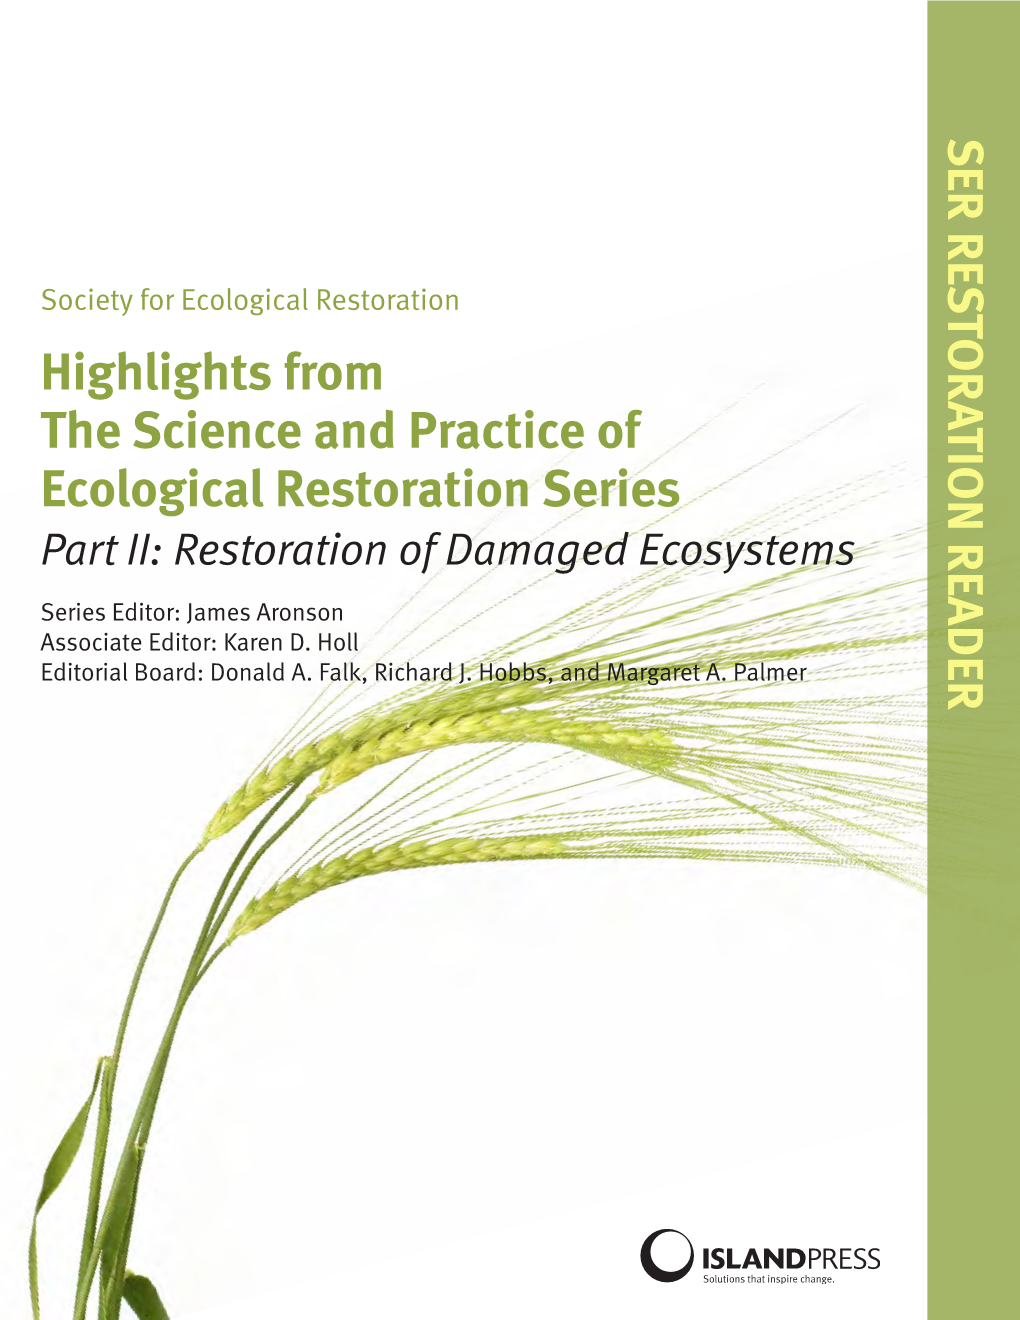 Highlights from the Science and Practice of Ecological Restoration Series Part II: Restoration of Damaged Ecosystems